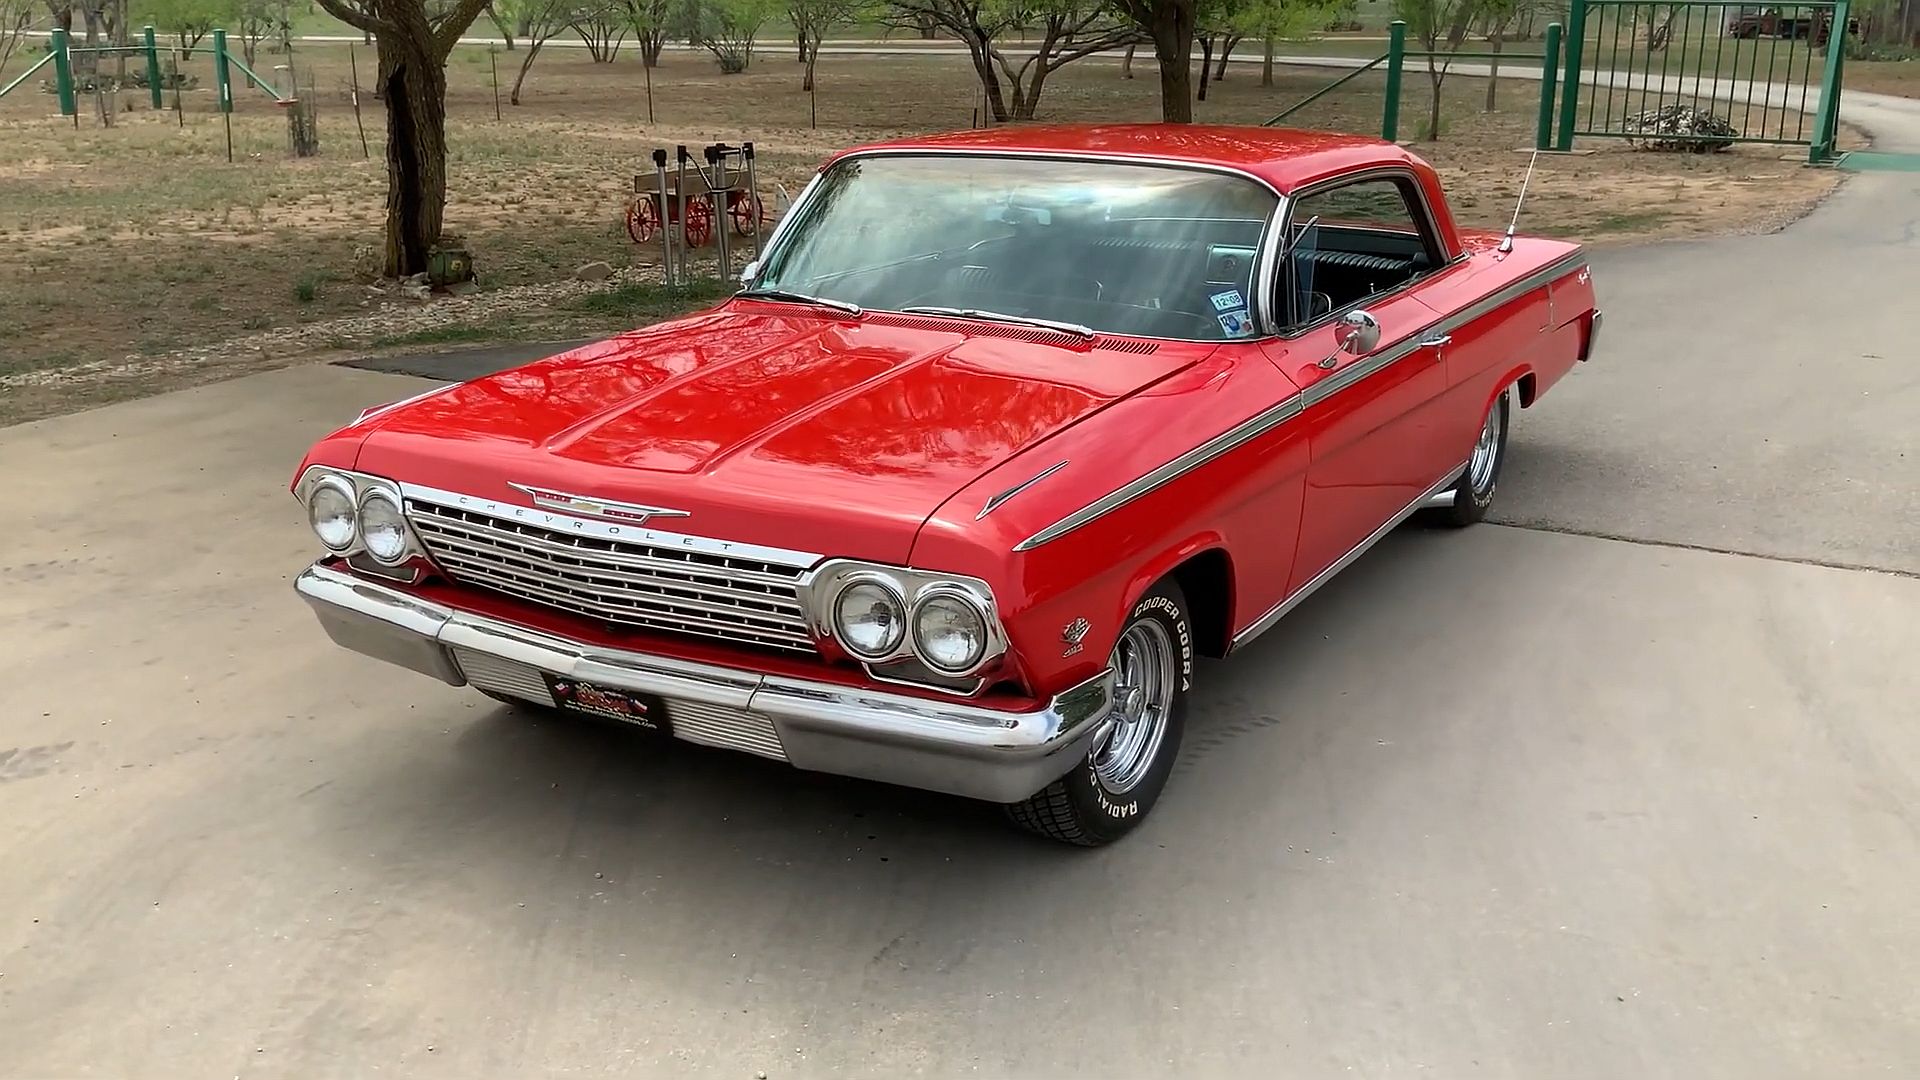 1962 Chevrolet Impala SS Is a Stock-Appearing Sleeper With a Big-Block Secret - autoevolution